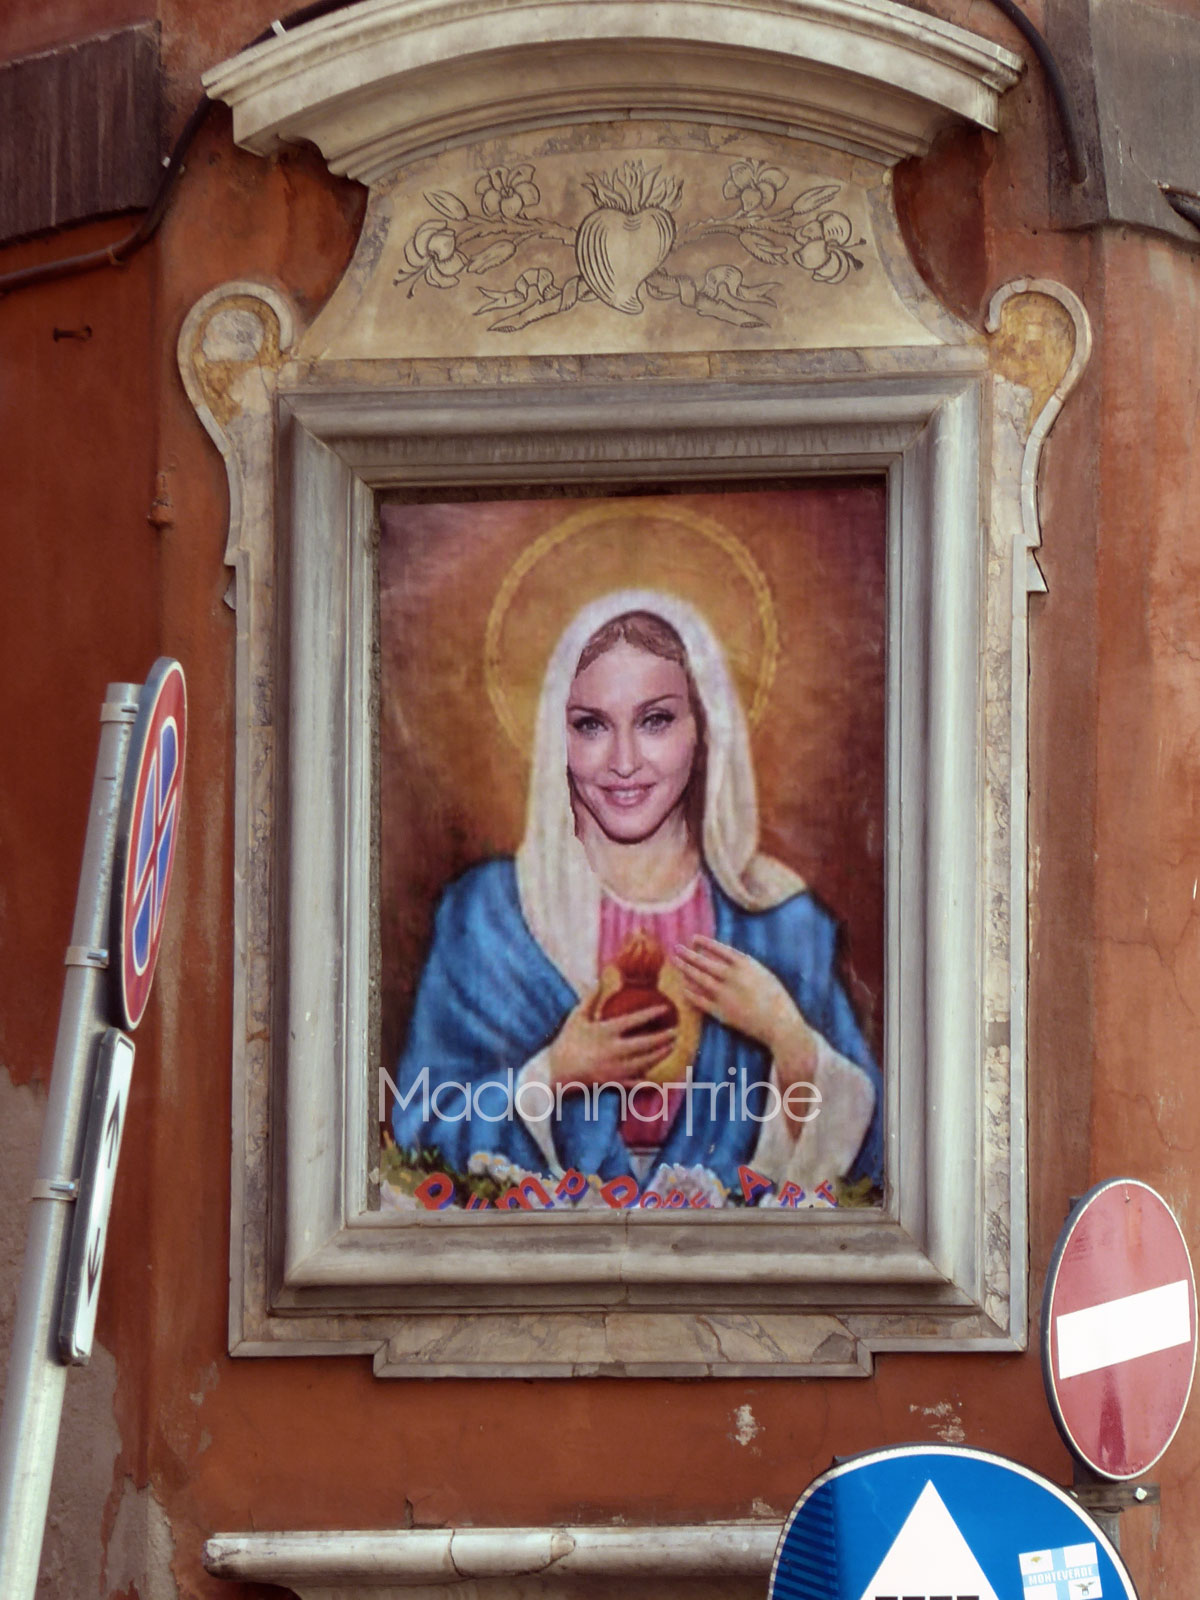 Madonna's image in Rome